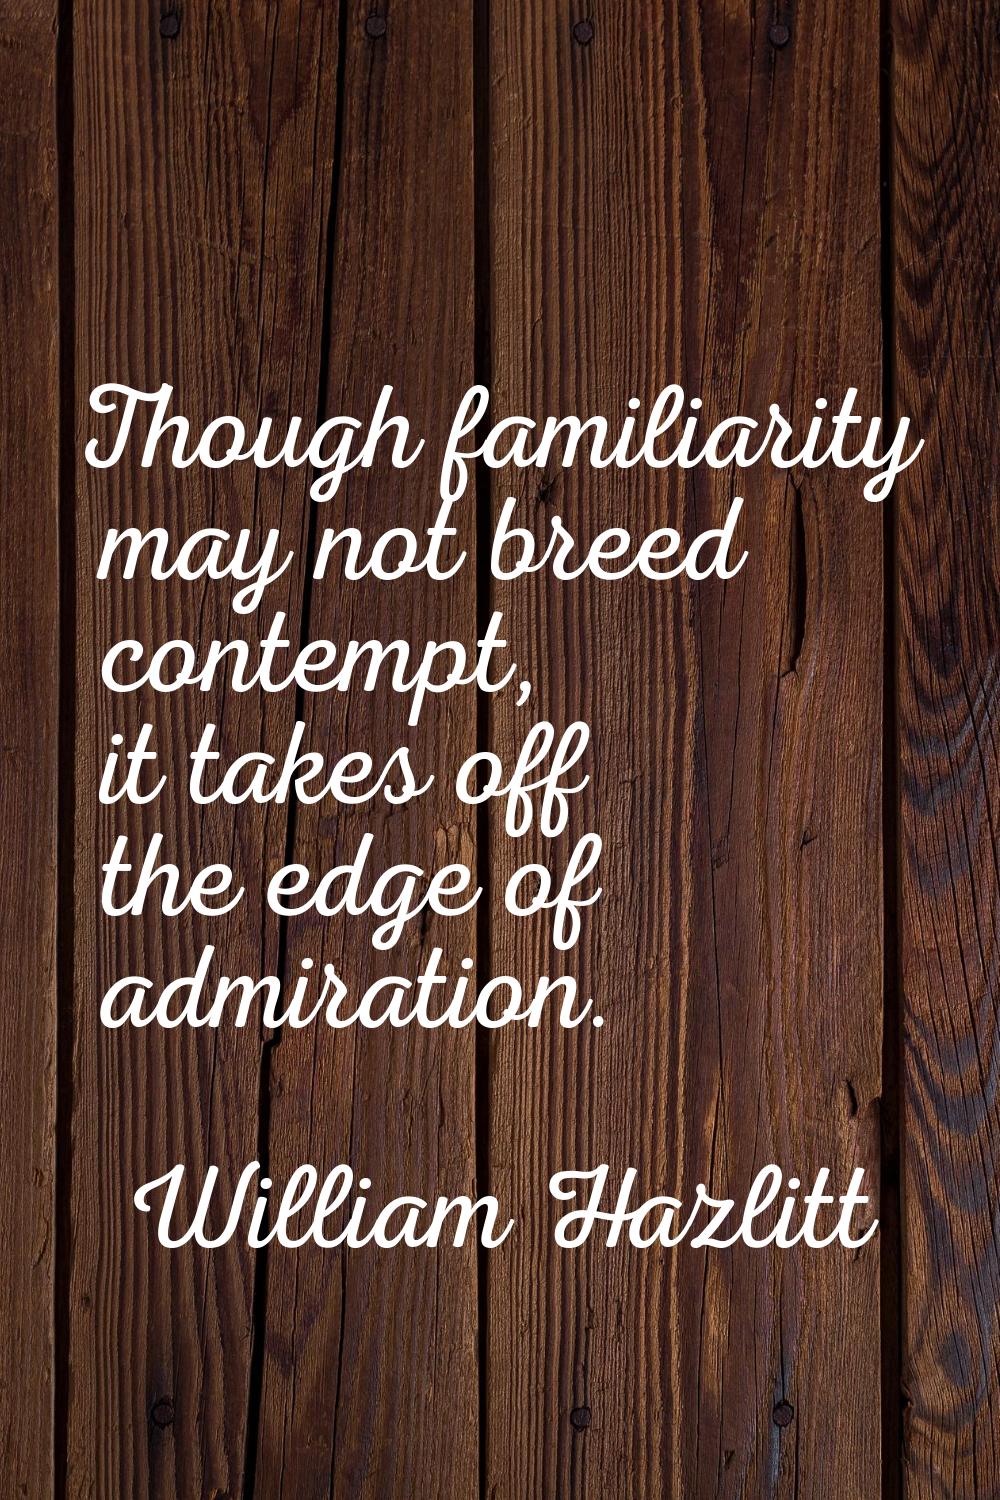 Though familiarity may not breed contempt, it takes off the edge of admiration.